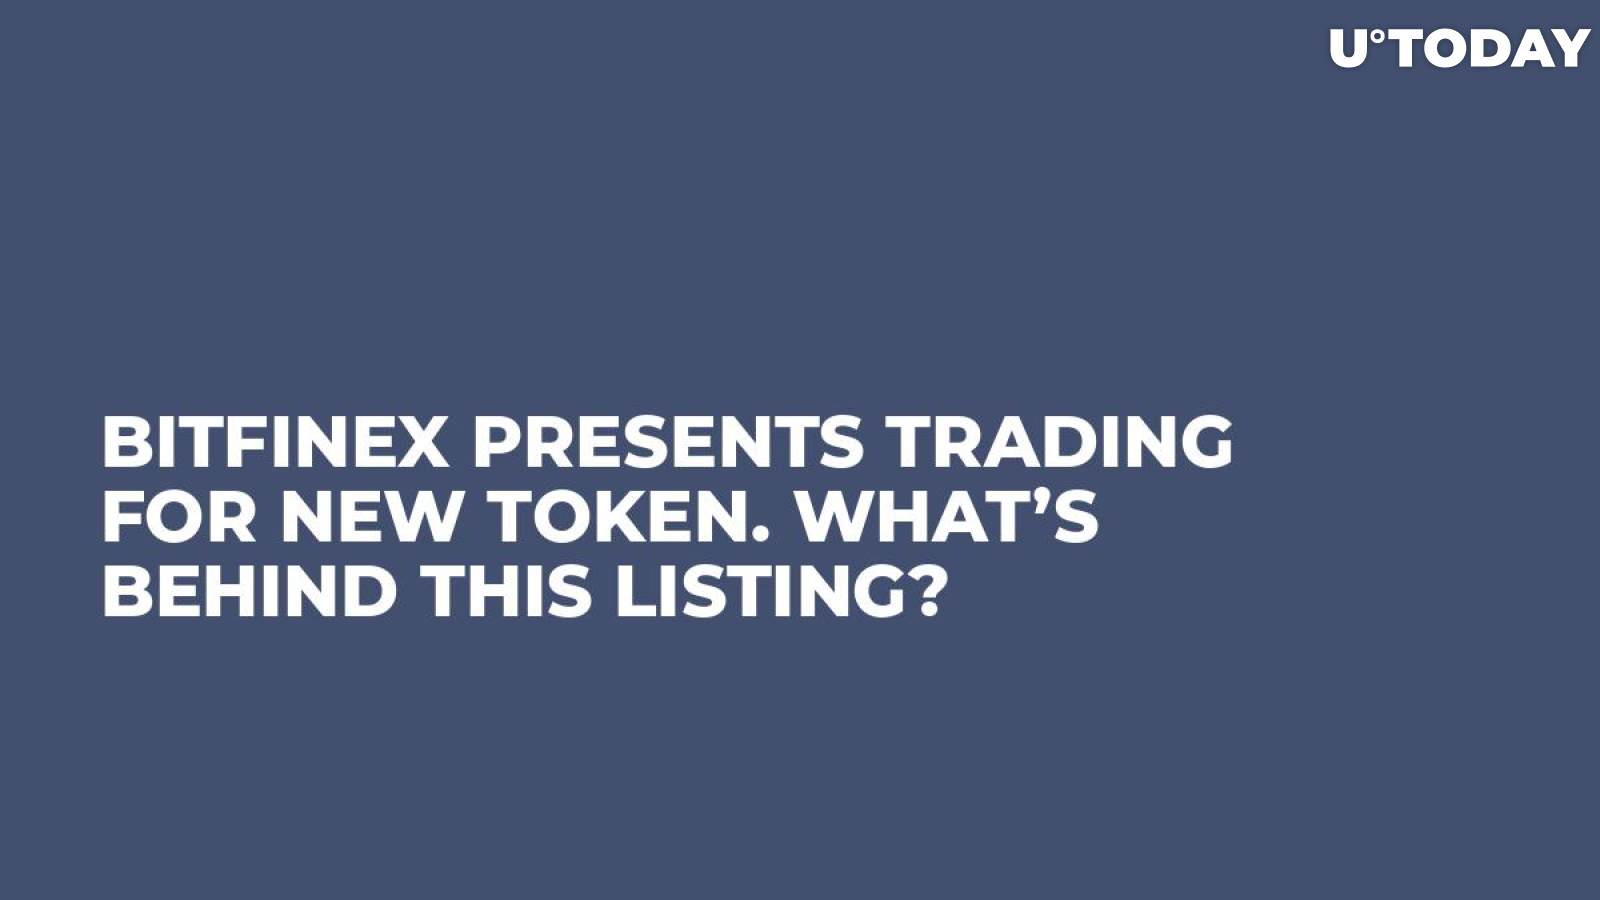 Bitfinex Presents Trading for New Token. What’s Behind This Listing?